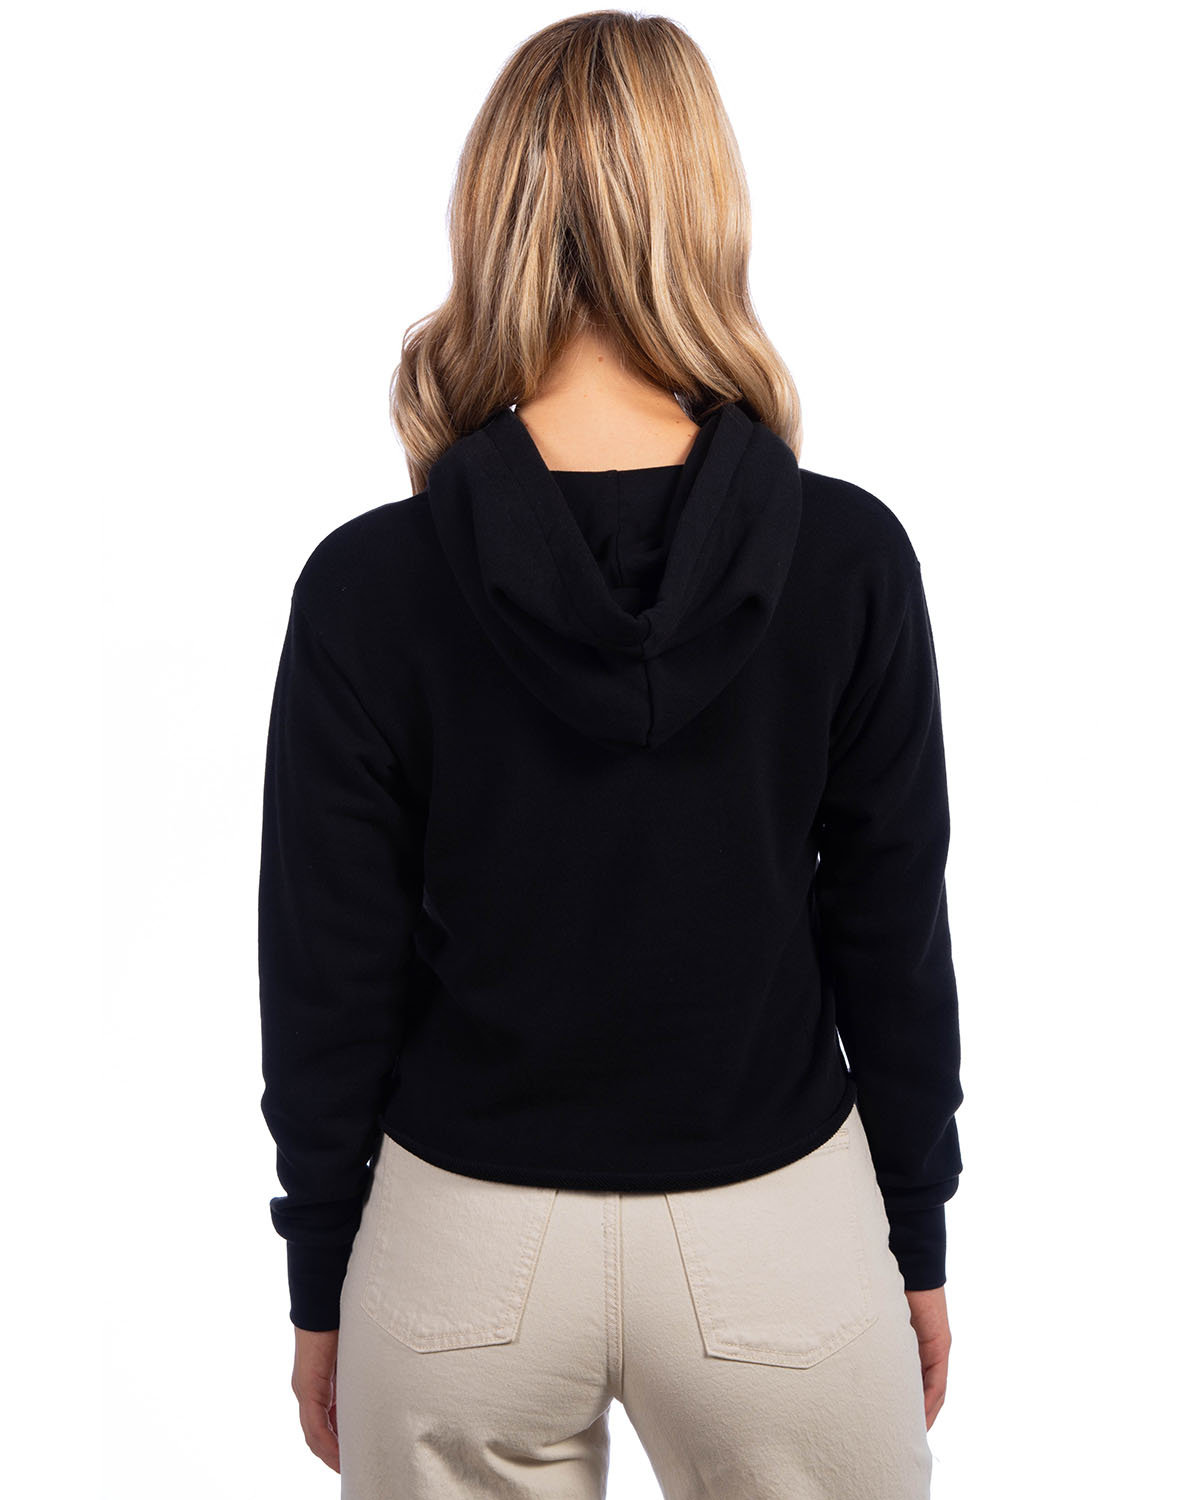 Next Level 9384 | Ladies' Cropped Pullover Hooded Sweatshirt | ShirtSpace